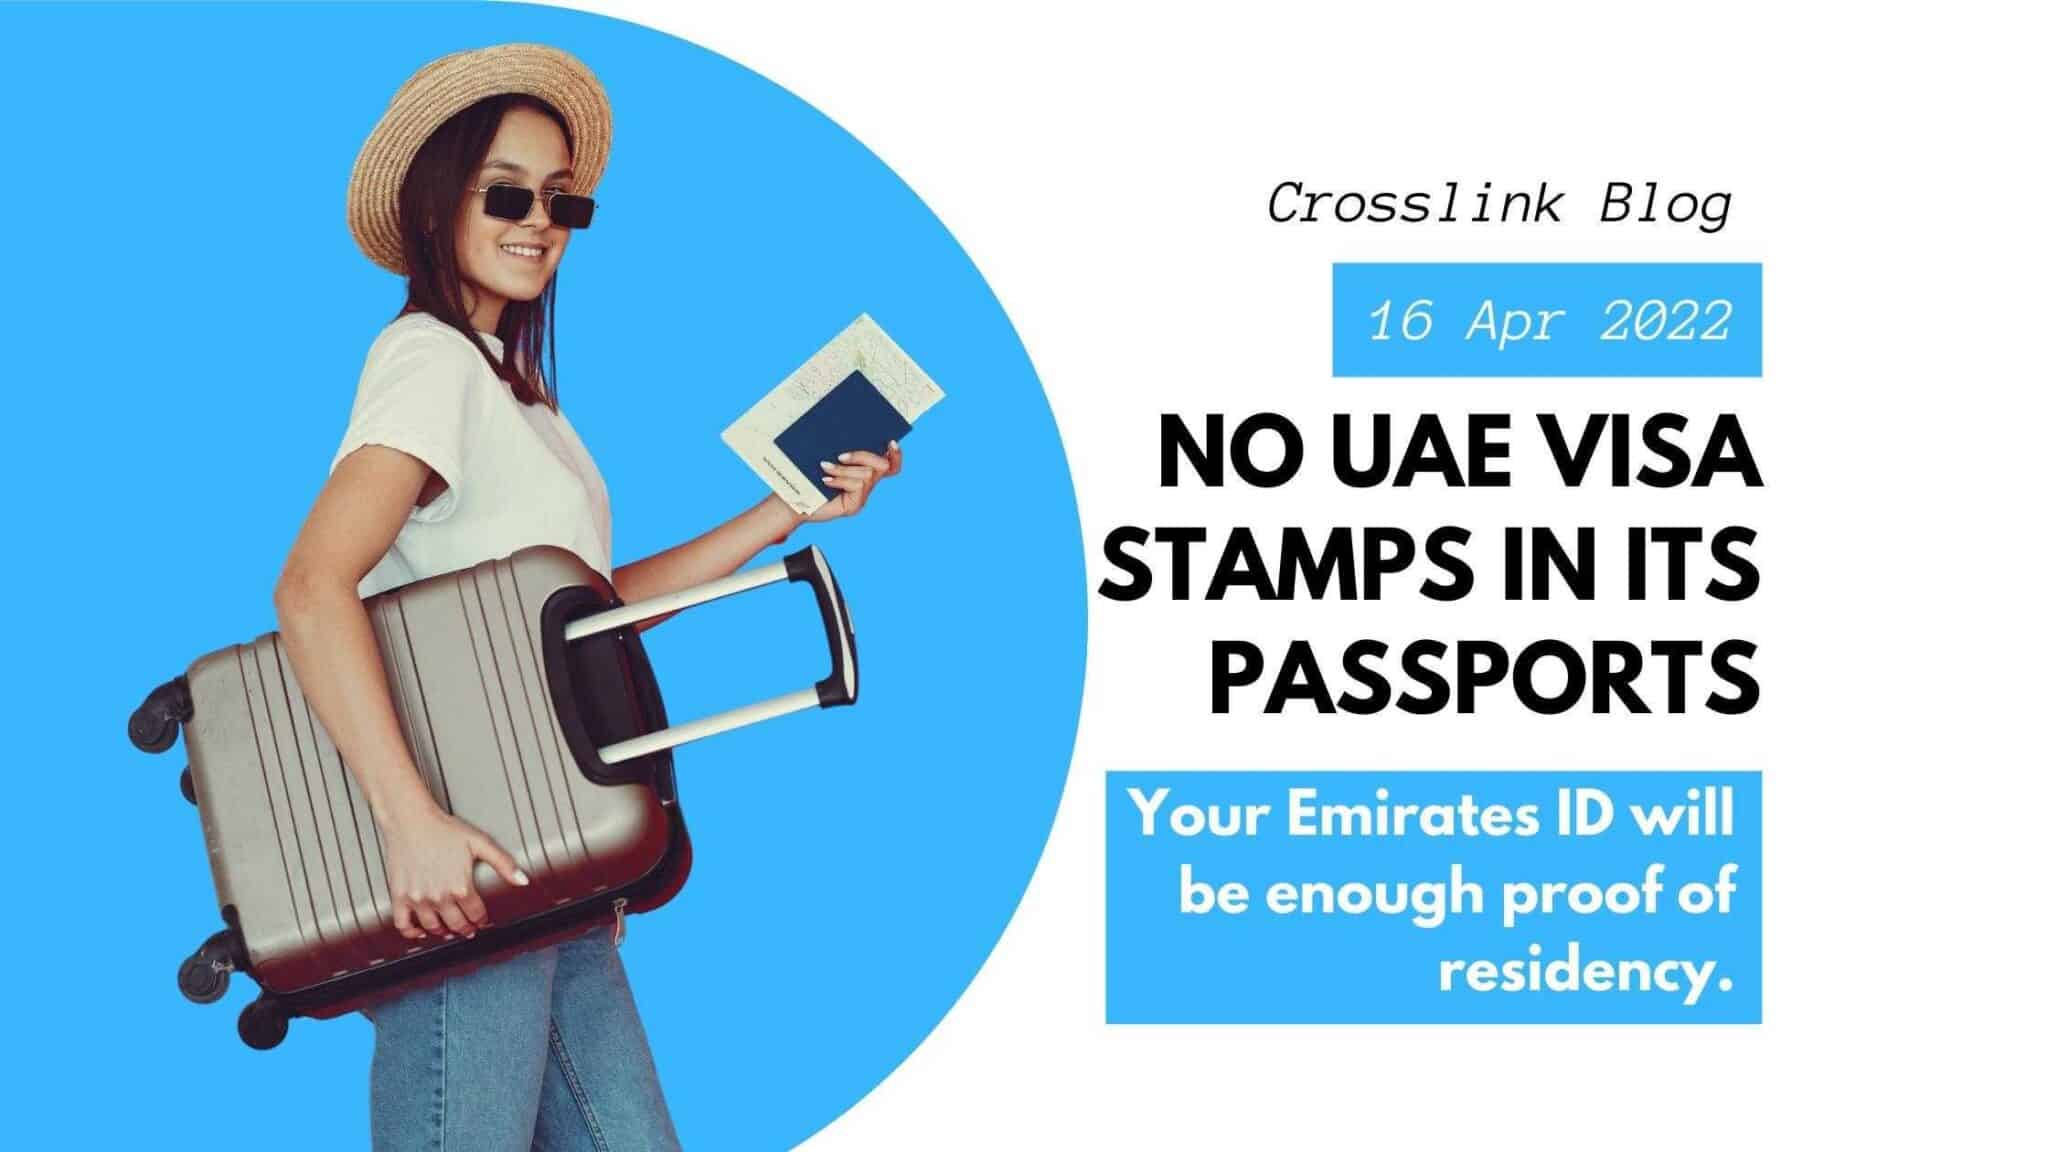 can i travel without visa stamping in uae